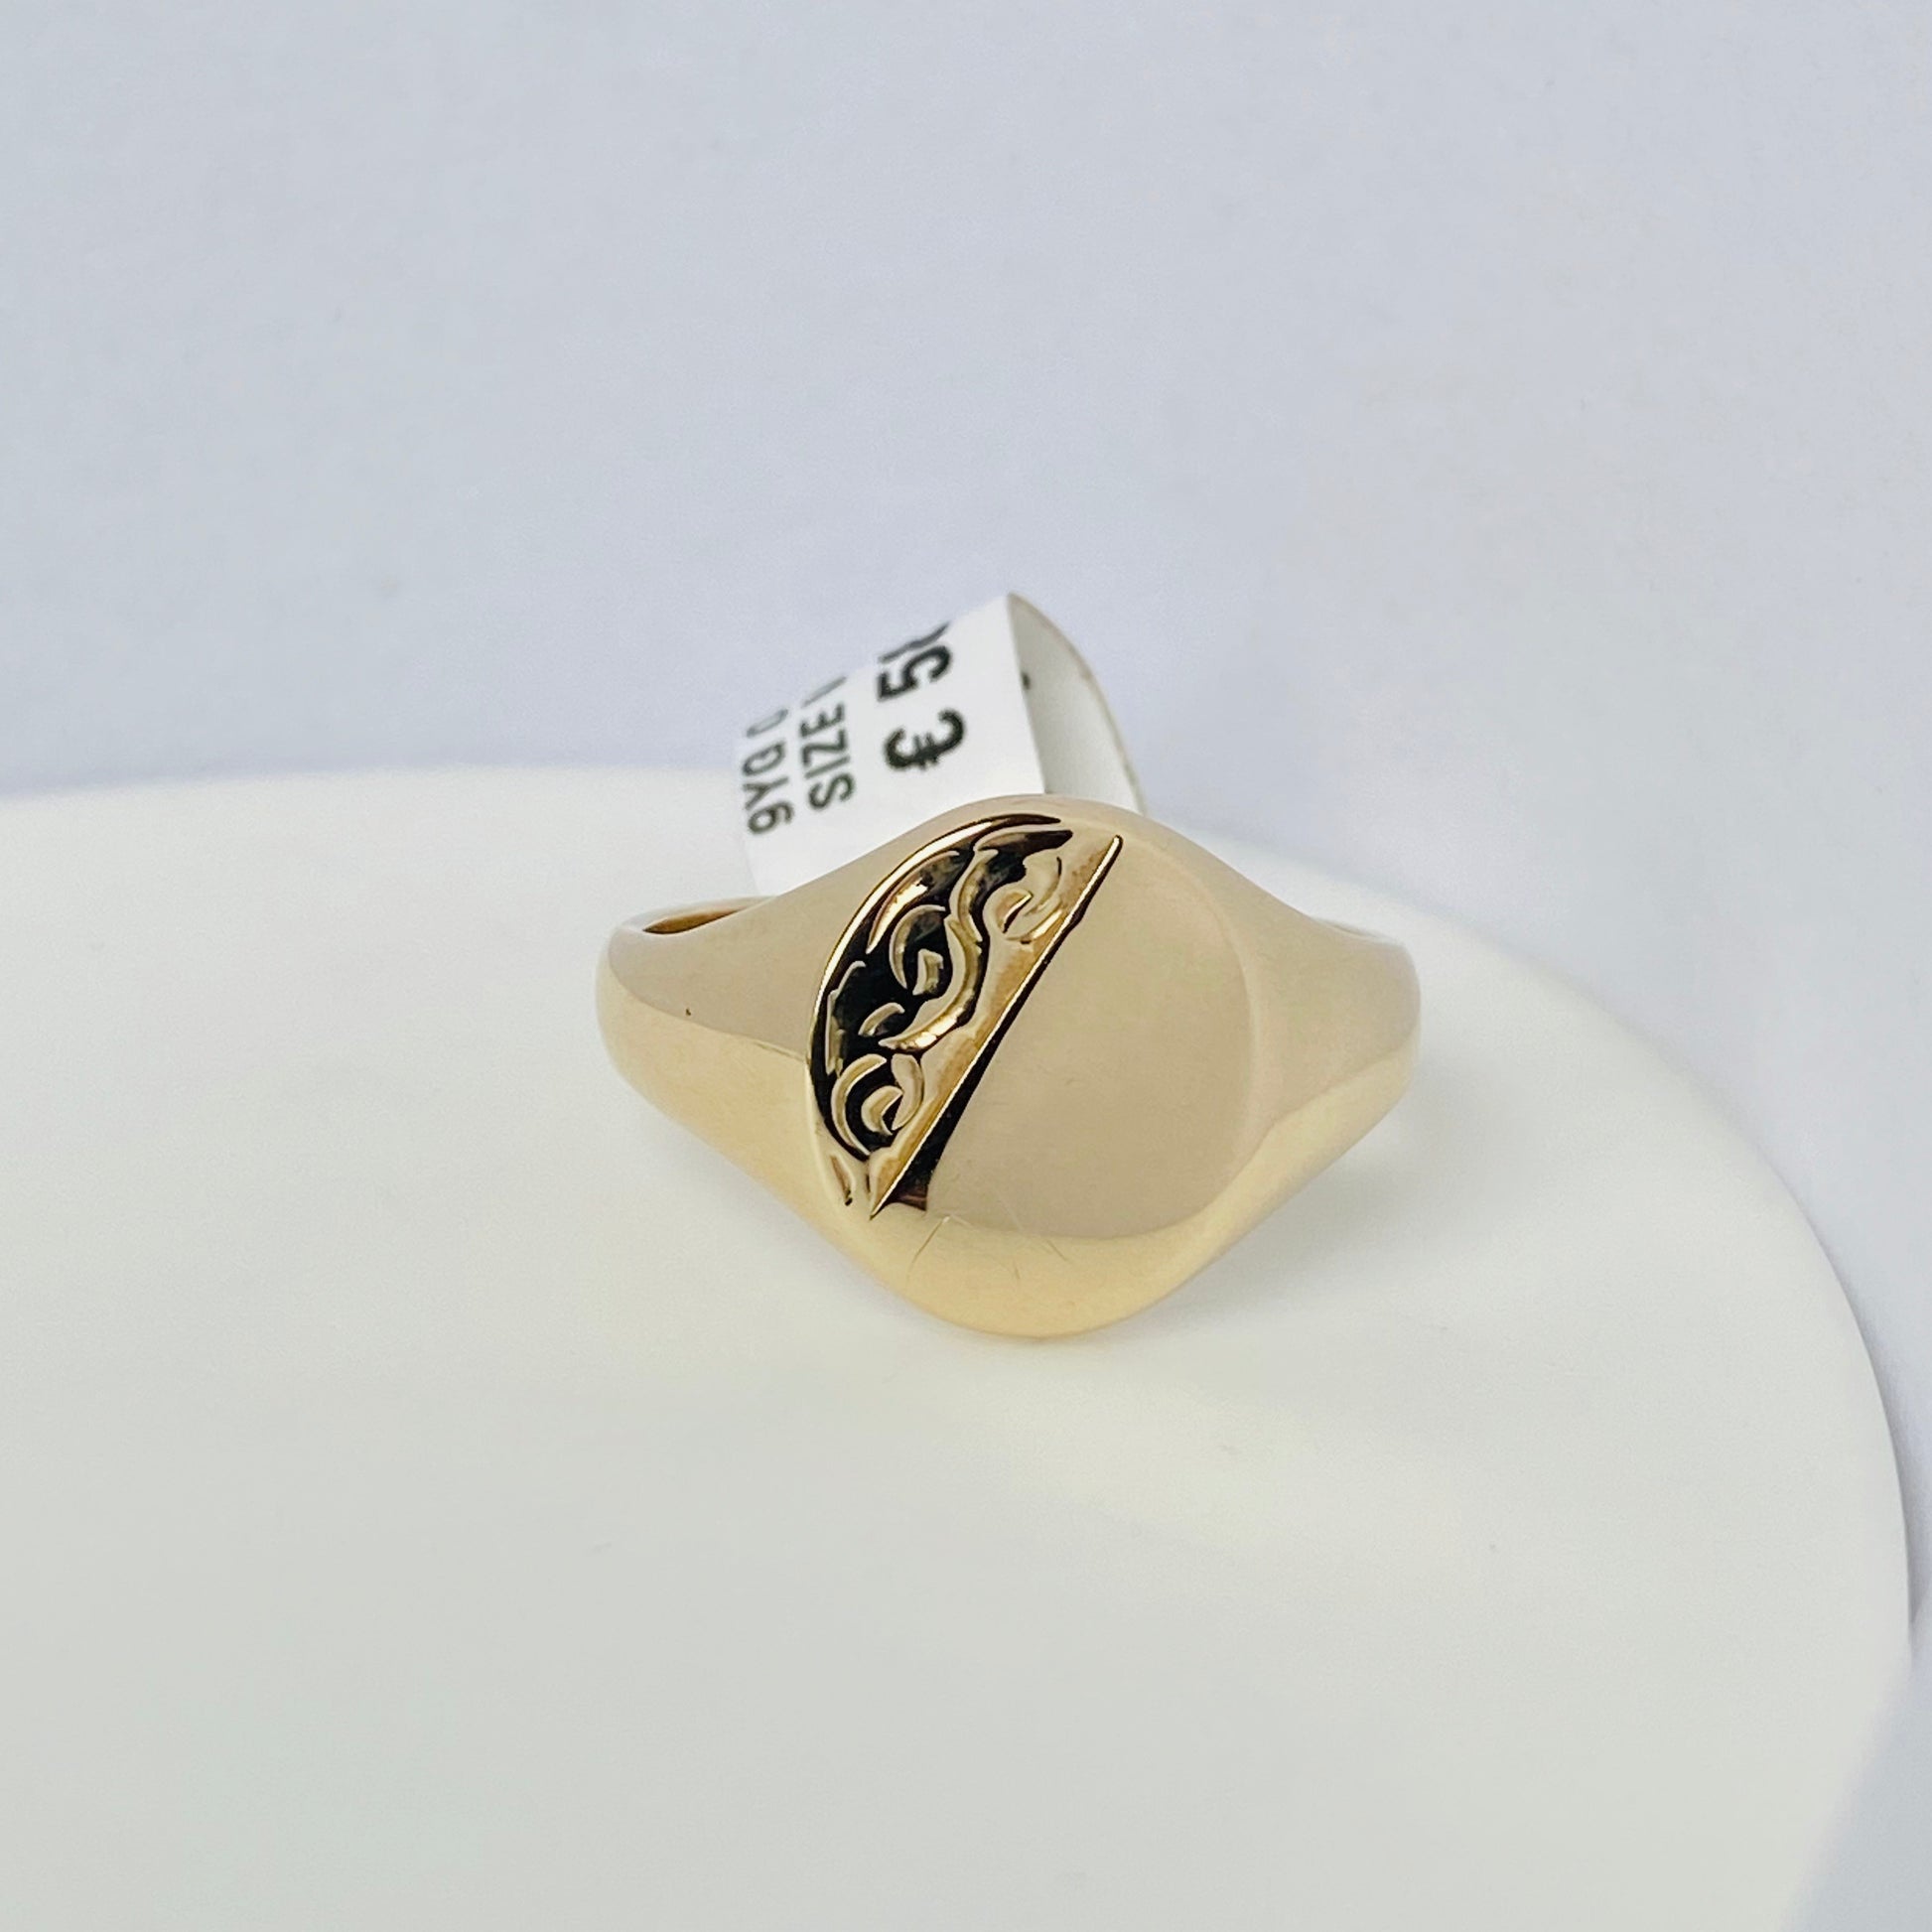 9ct Gold Gents Engraved Oval Signet Ring - John Ross Jewellers